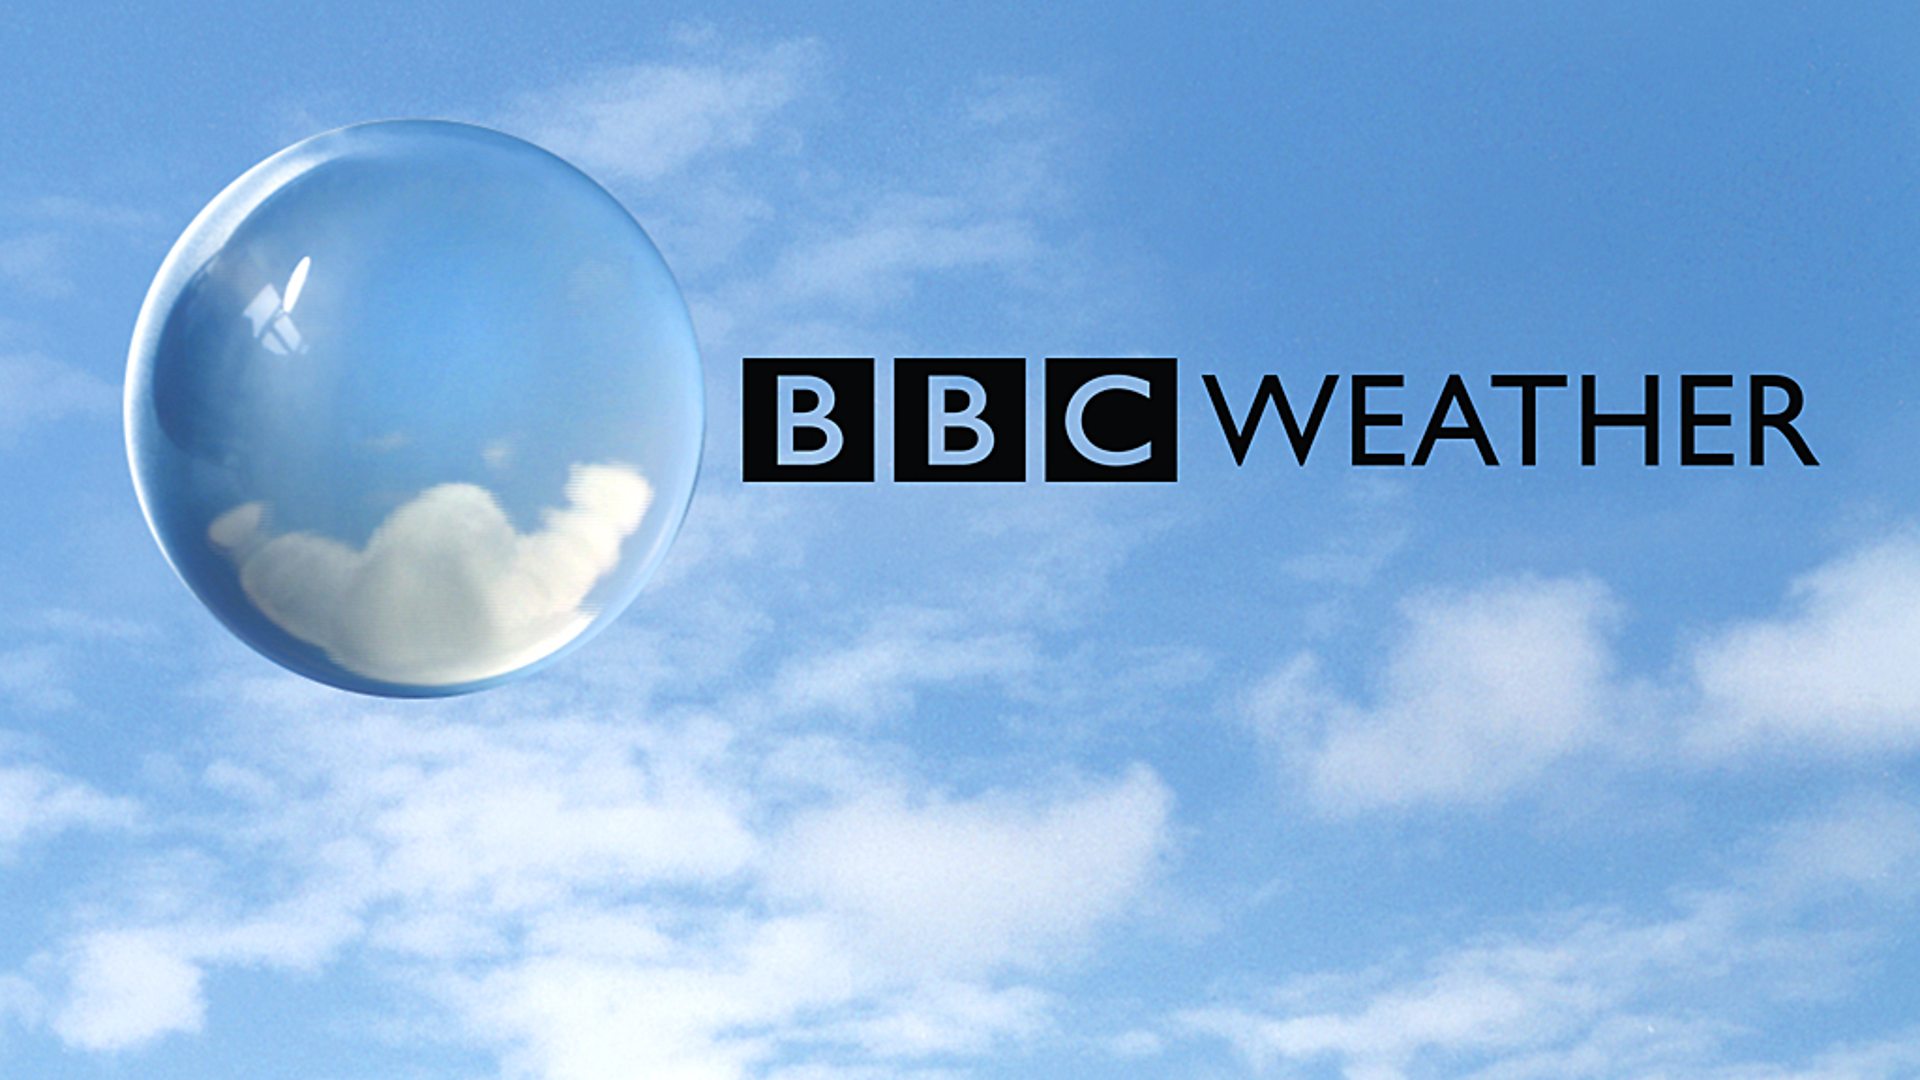 project director bbc weather procurement nigel charters said he is extremely pleased about the replacement photo bbc